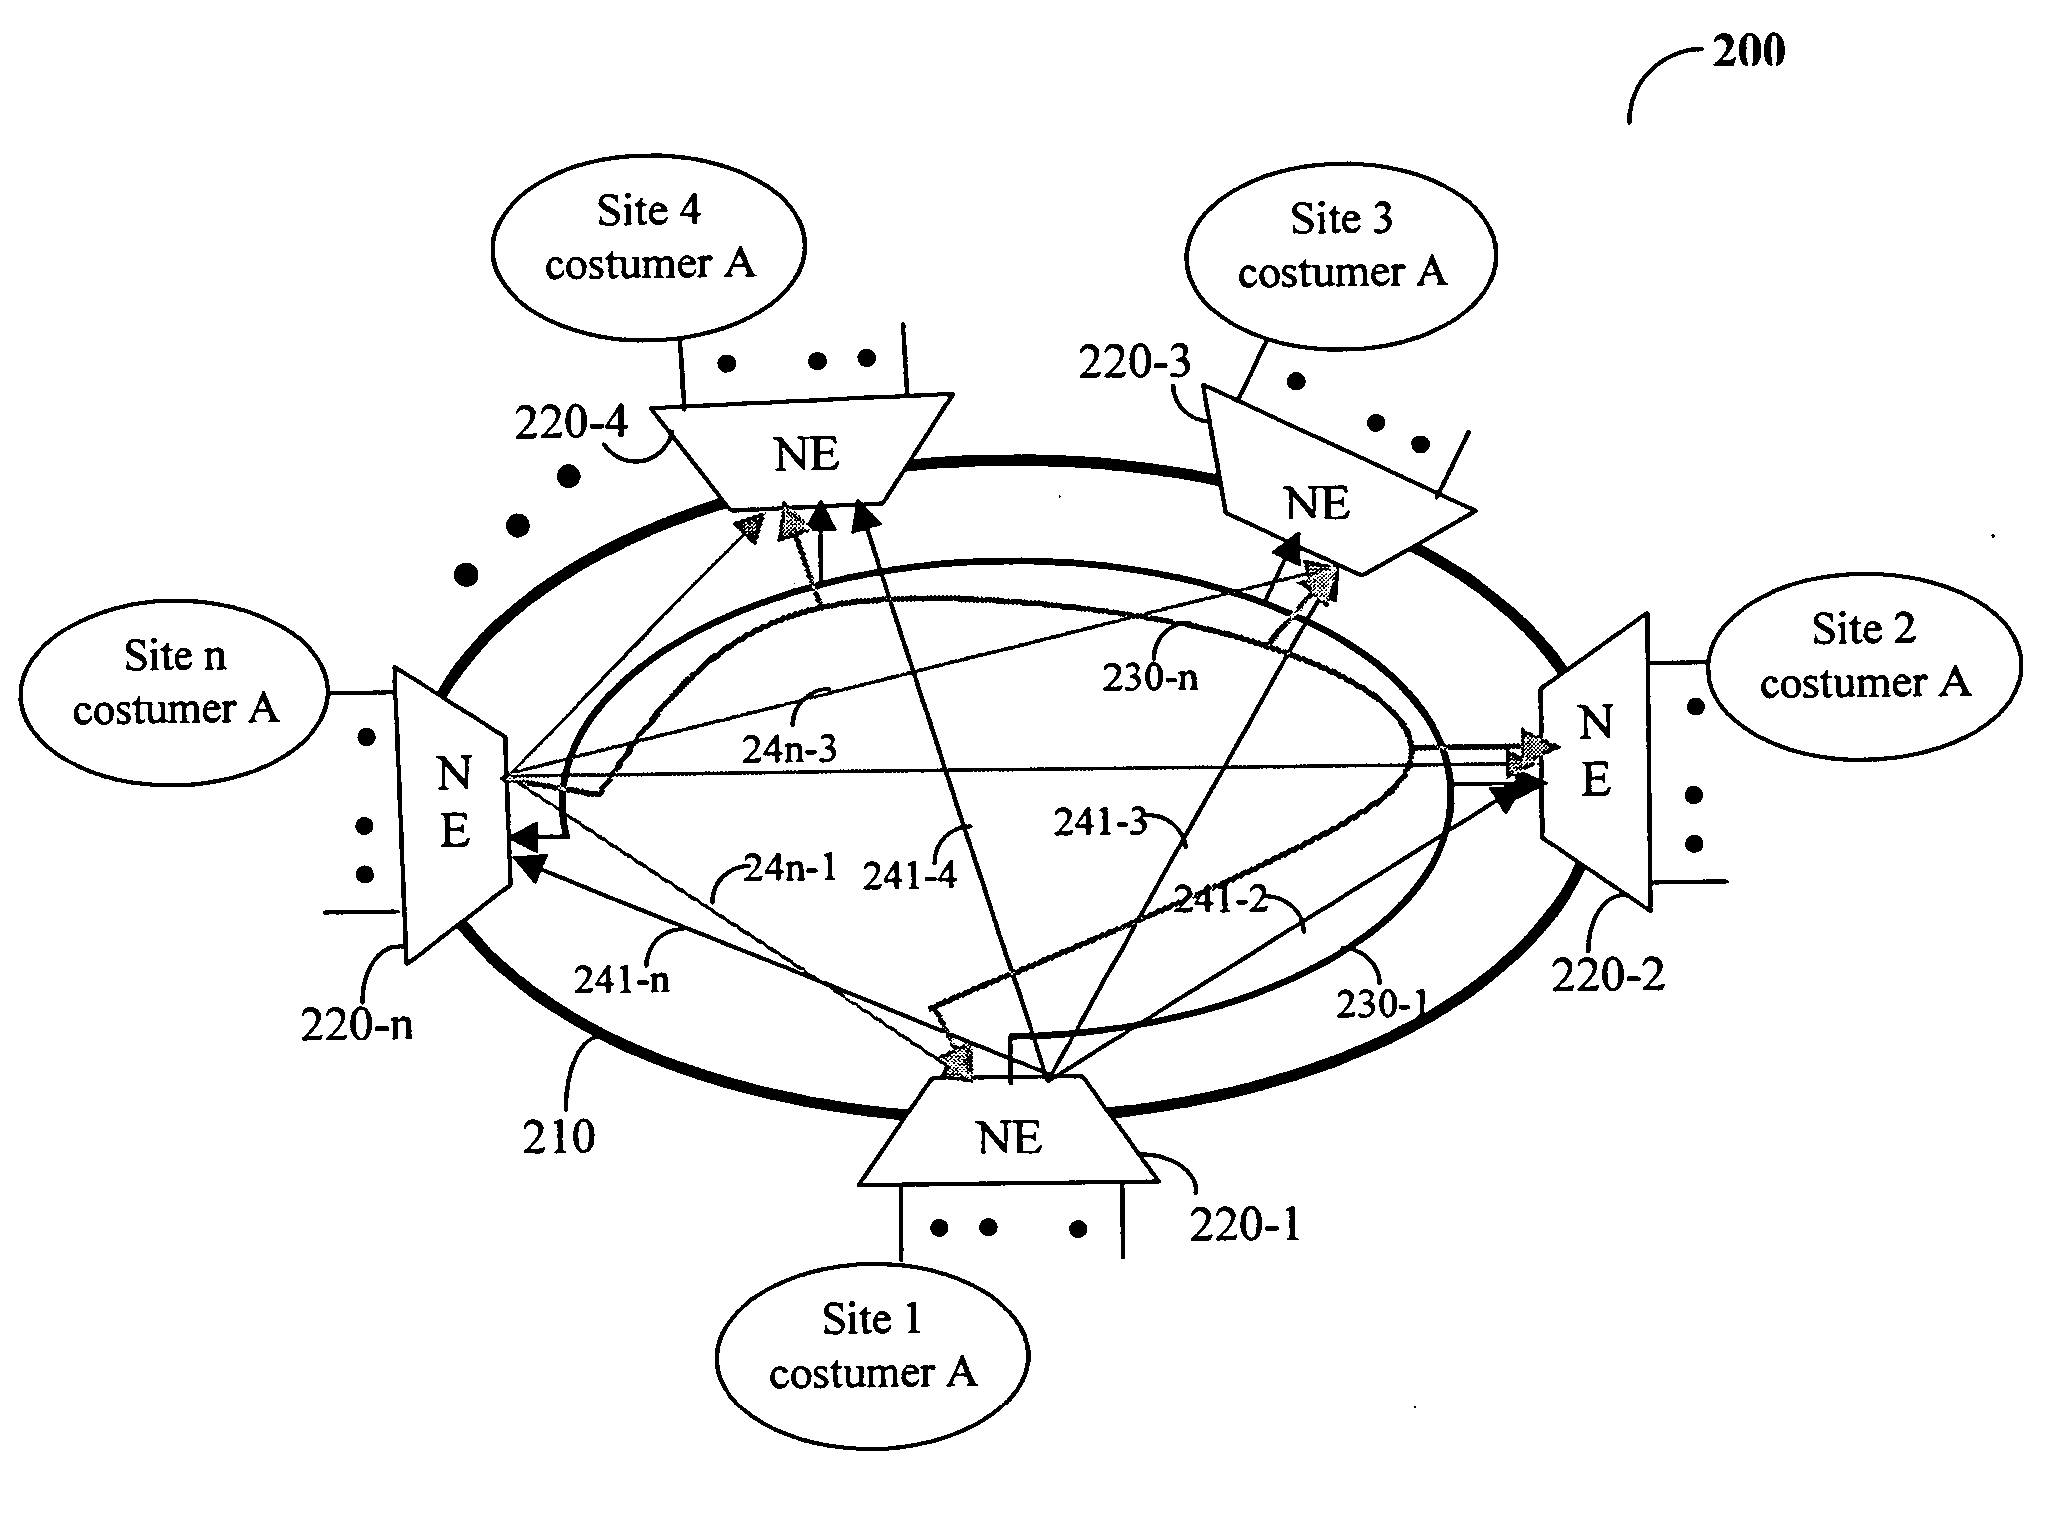 Method for enabling multipoint network services over a ring topology network